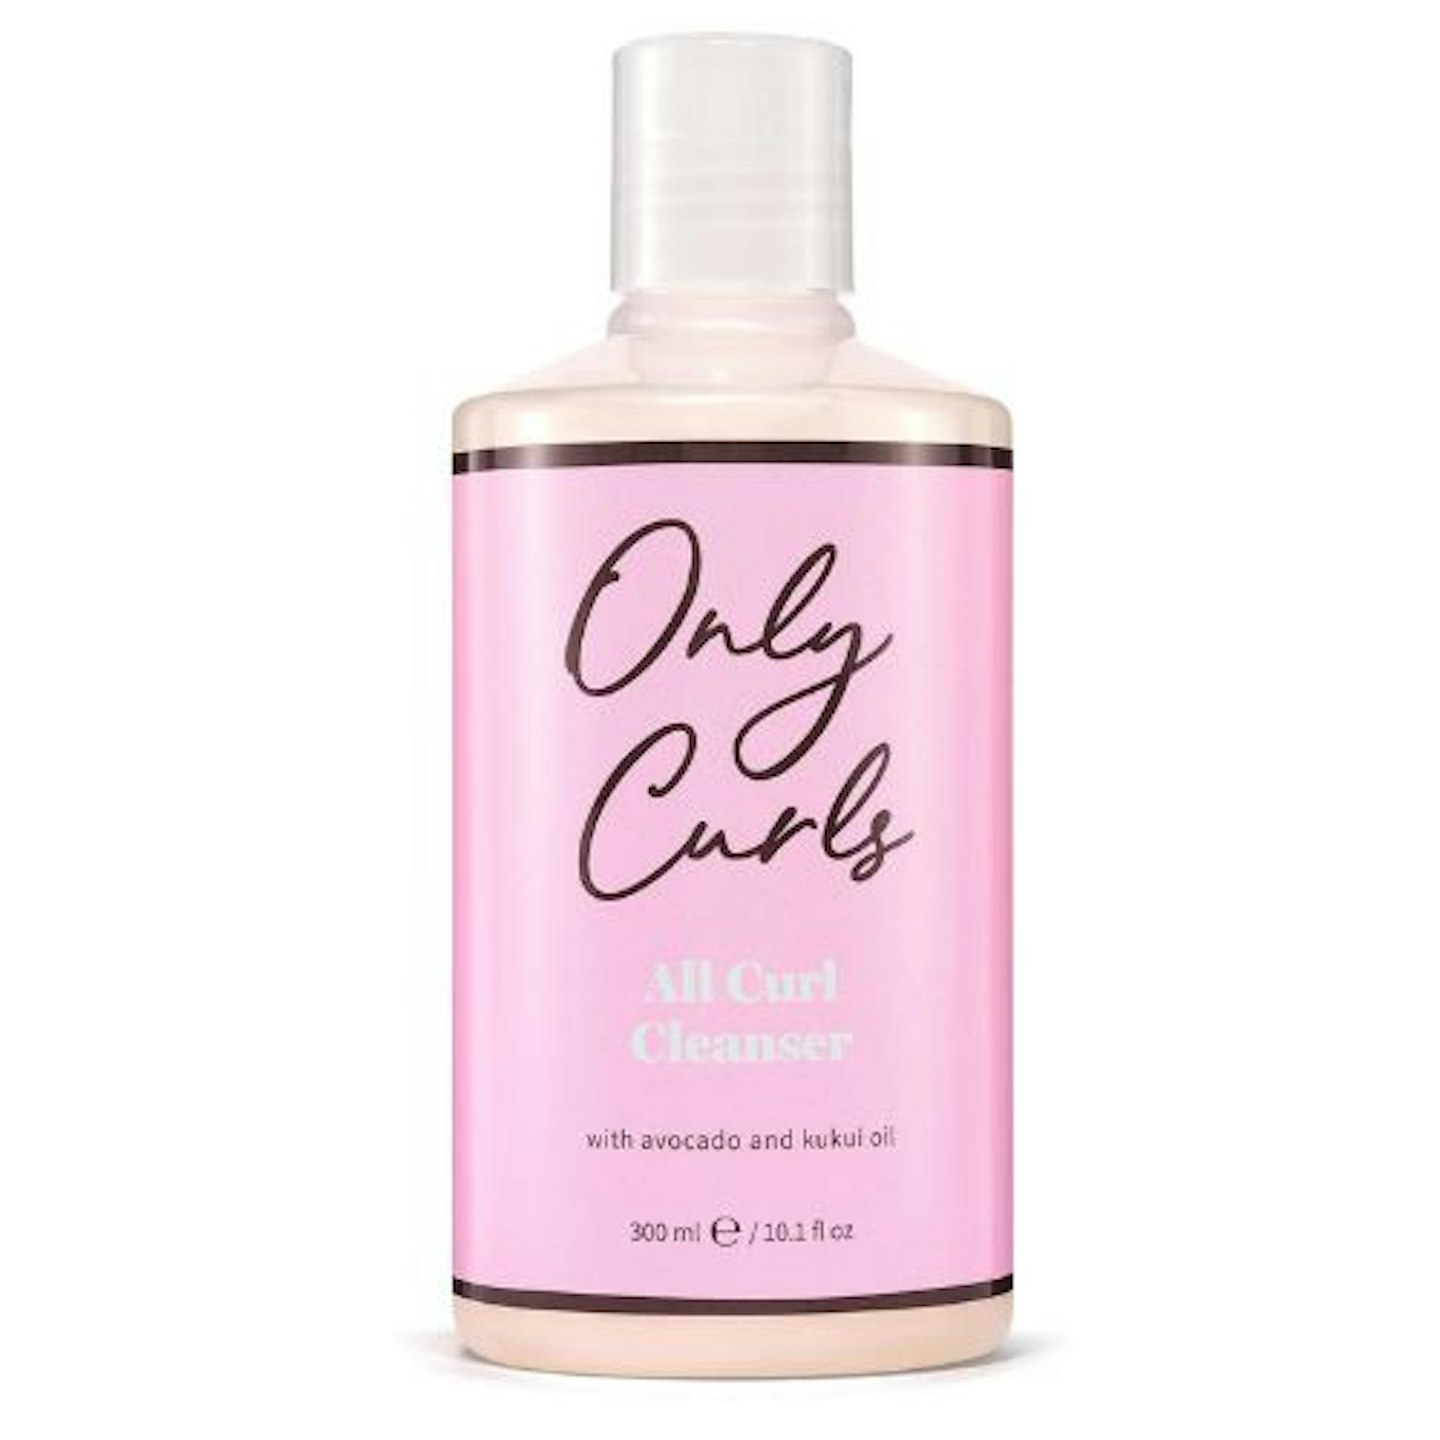 All Curl Cleanser